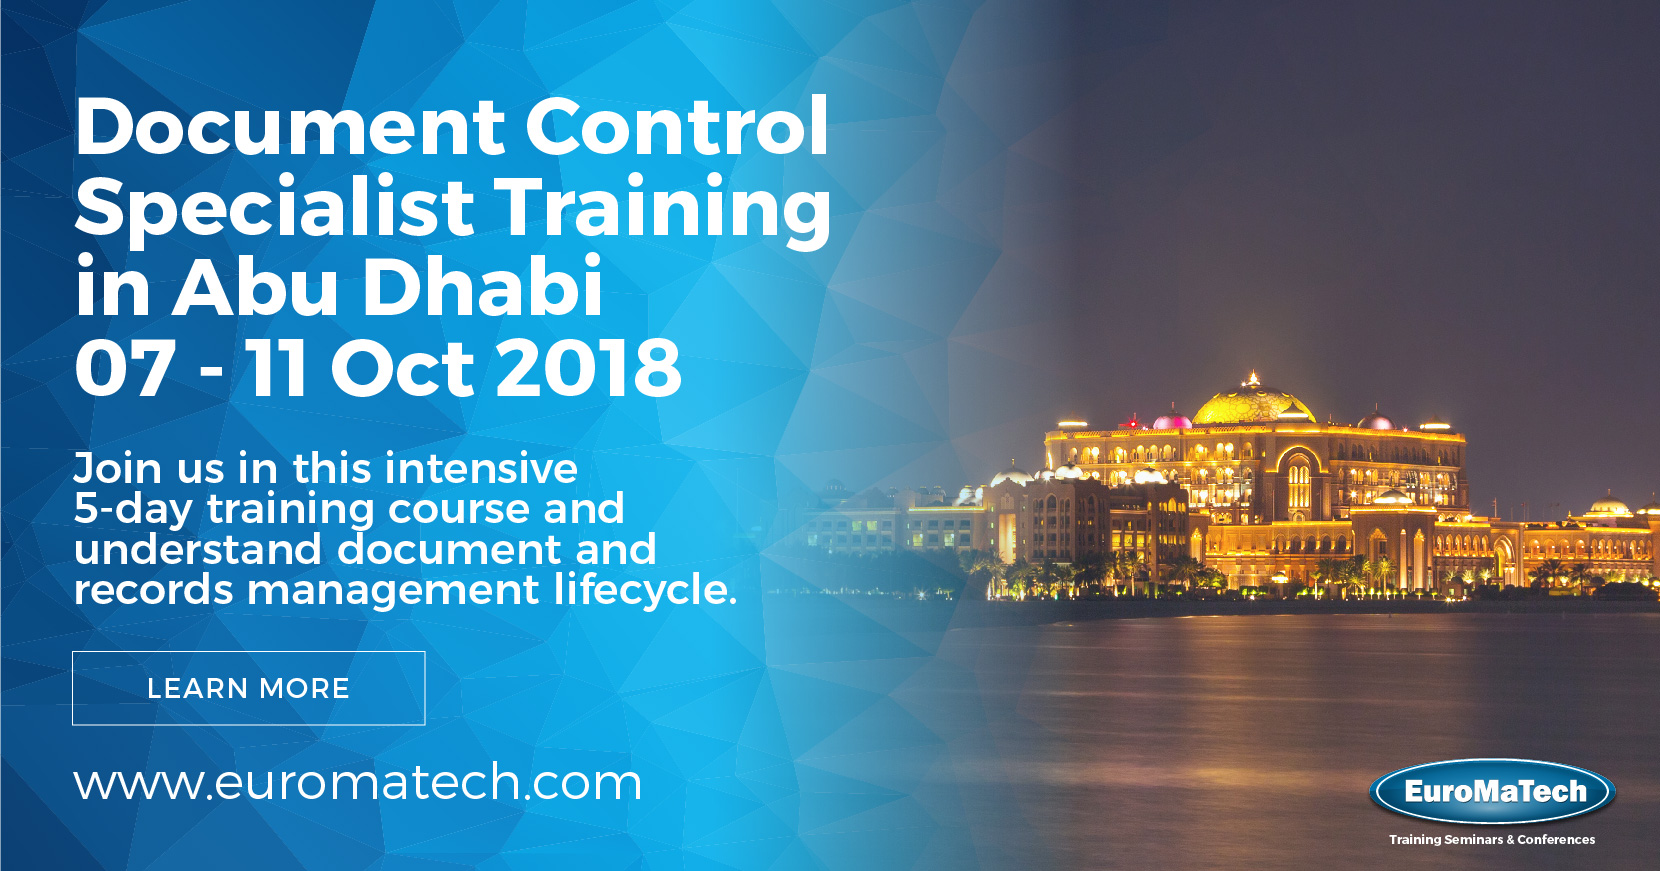 Document Control Specialist Training Course in Abu Dhabi